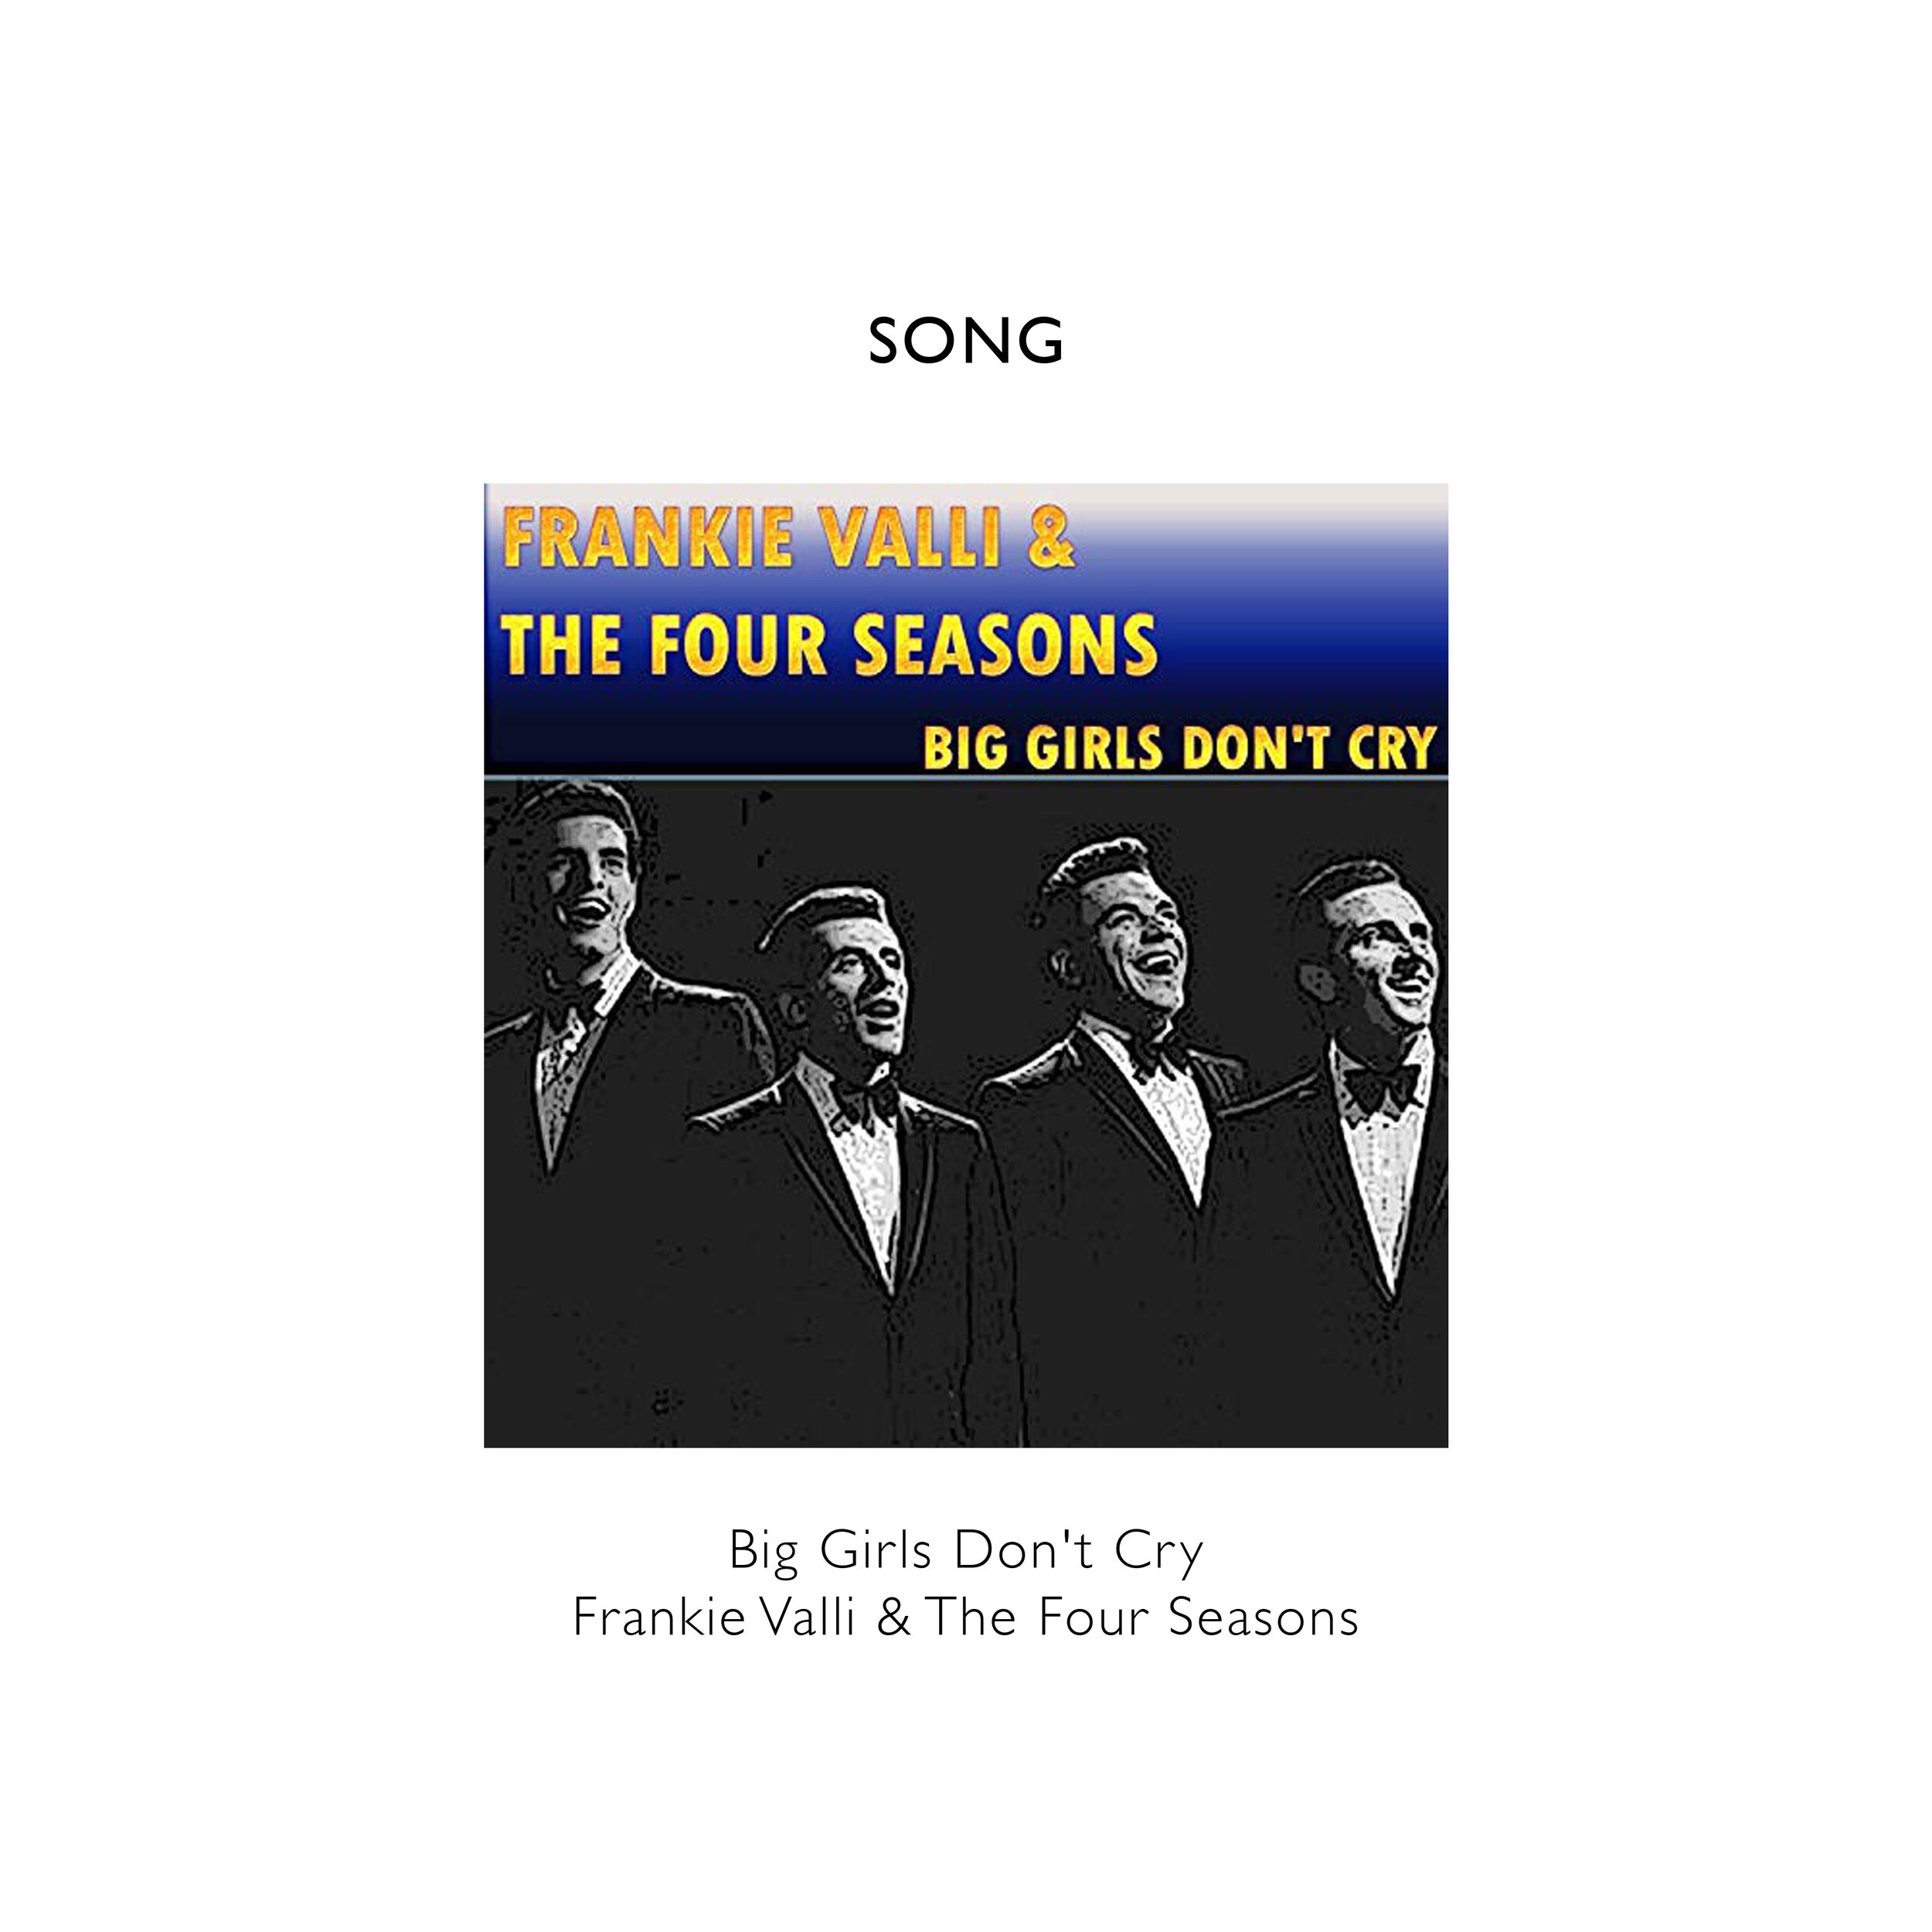 REFERENCE BLOG TEMPLATE Big Girls Don't Cry Frankie Valli, Four Seasons  copy.jpg